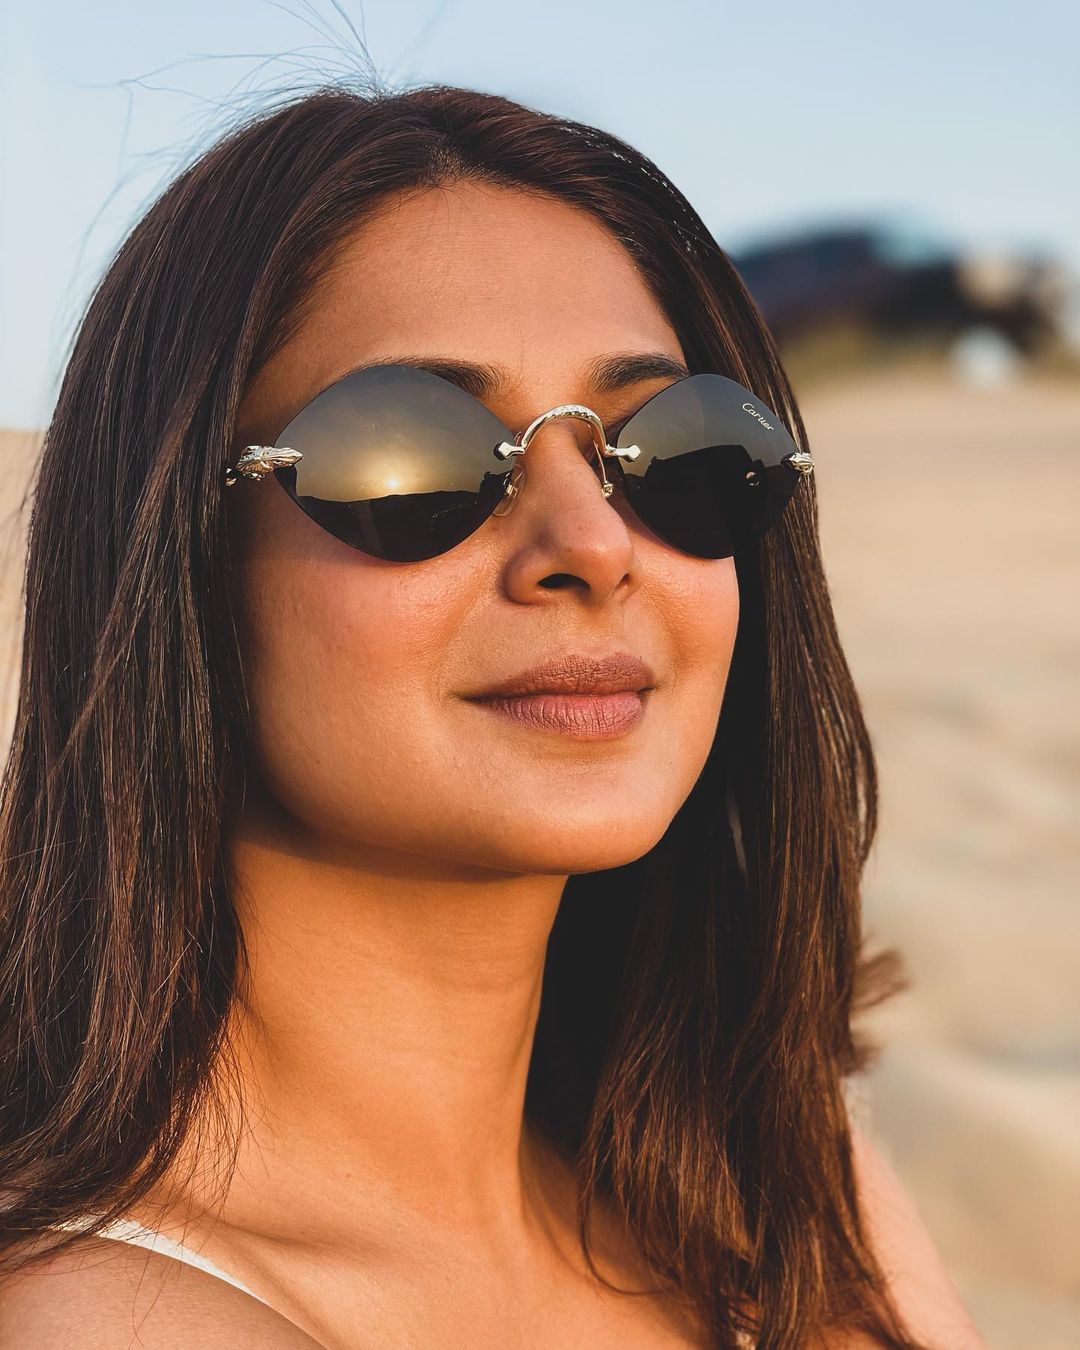 Jennifer Winget pairs her outfit with chic eyewear